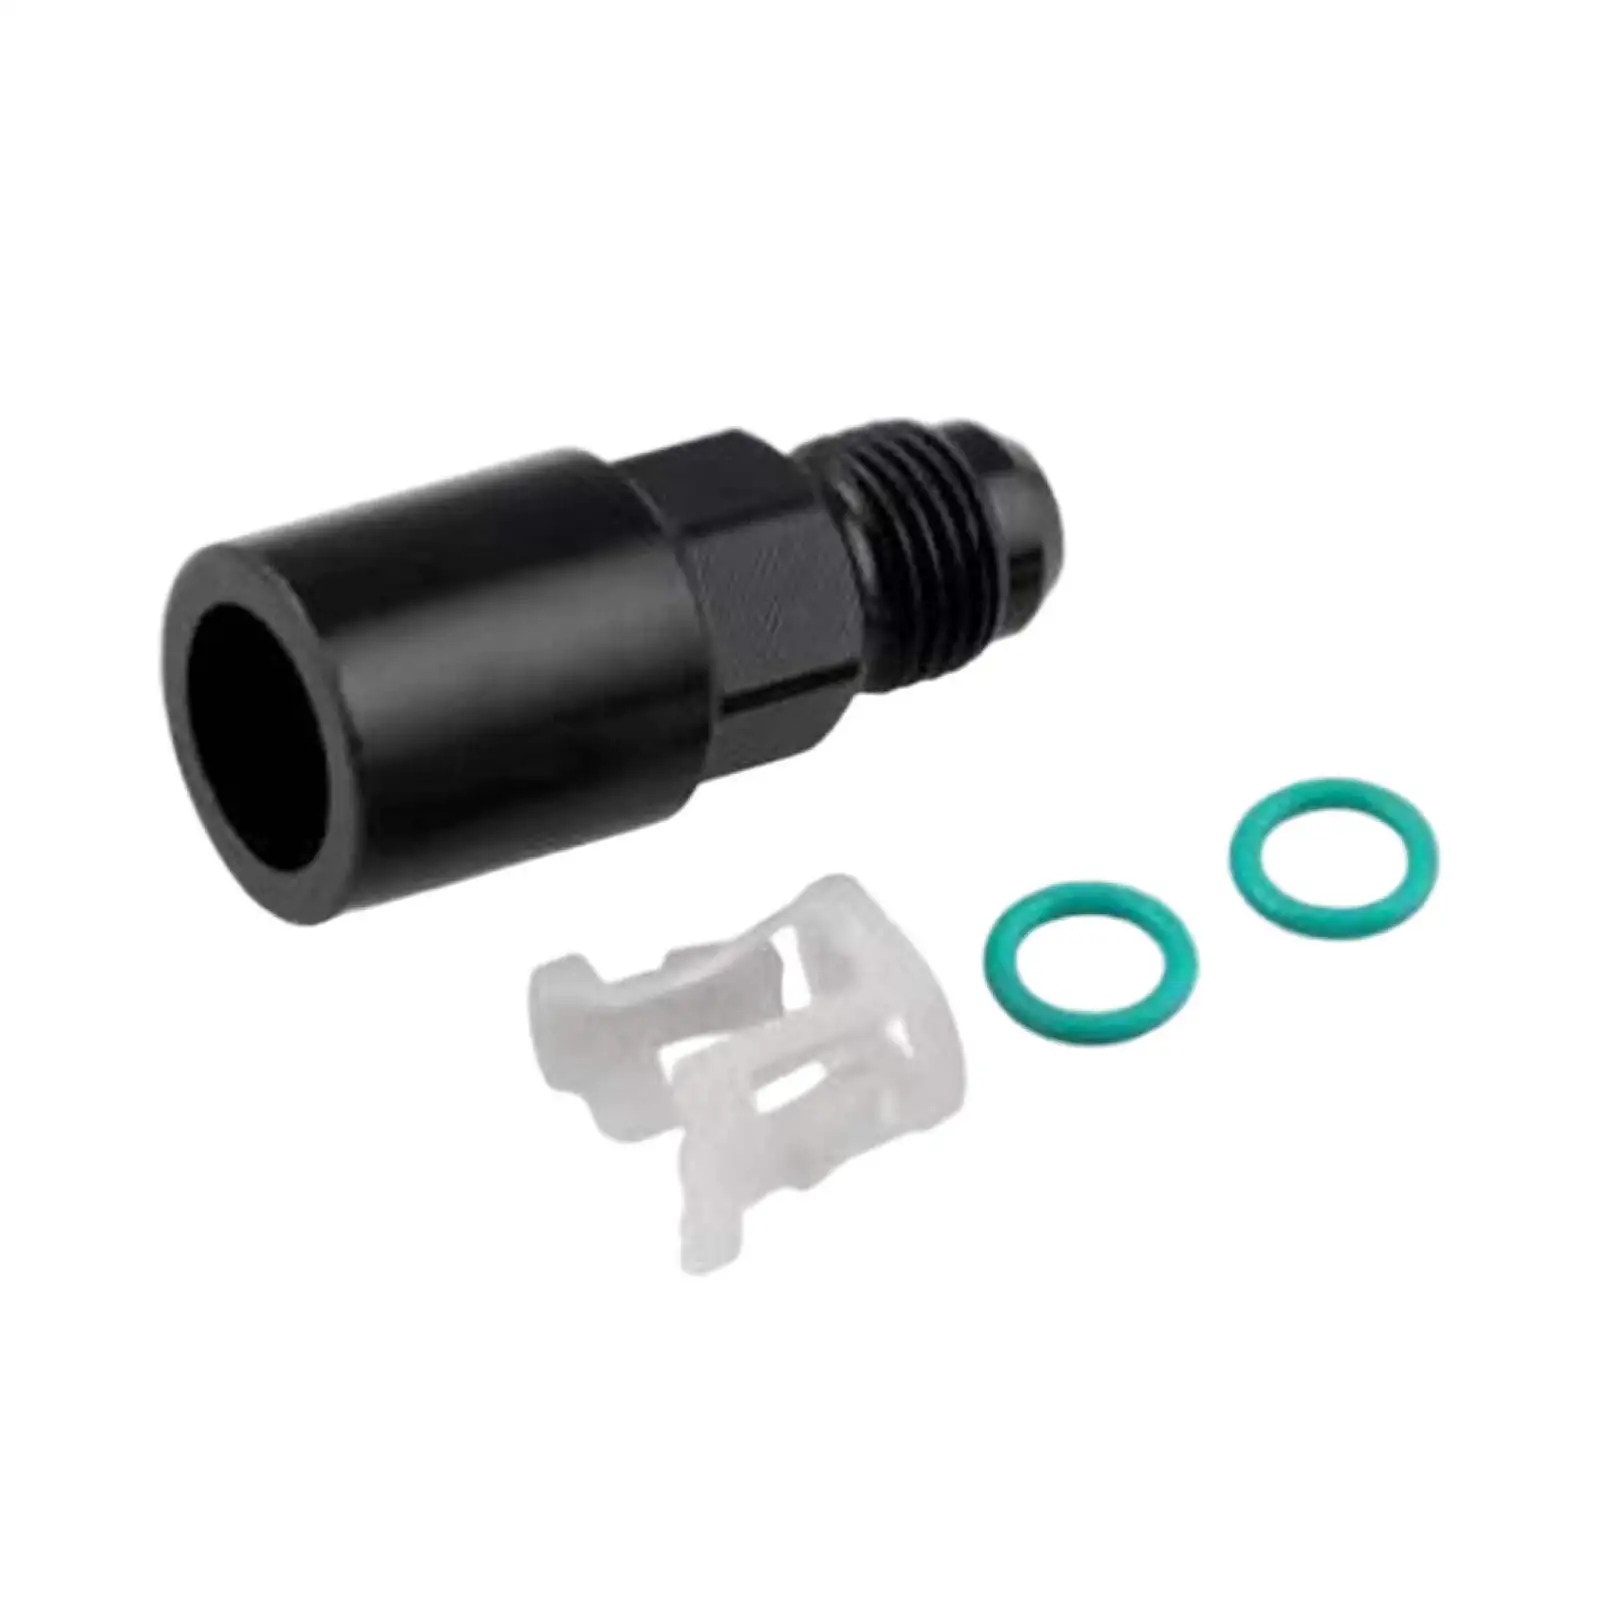 Fuel Adapter Fitting 6AN to 5/16 GM LS W/ Clip Female Black Fuel Distribution Pipe Joint for Gas Fuel Oil Coolant Air